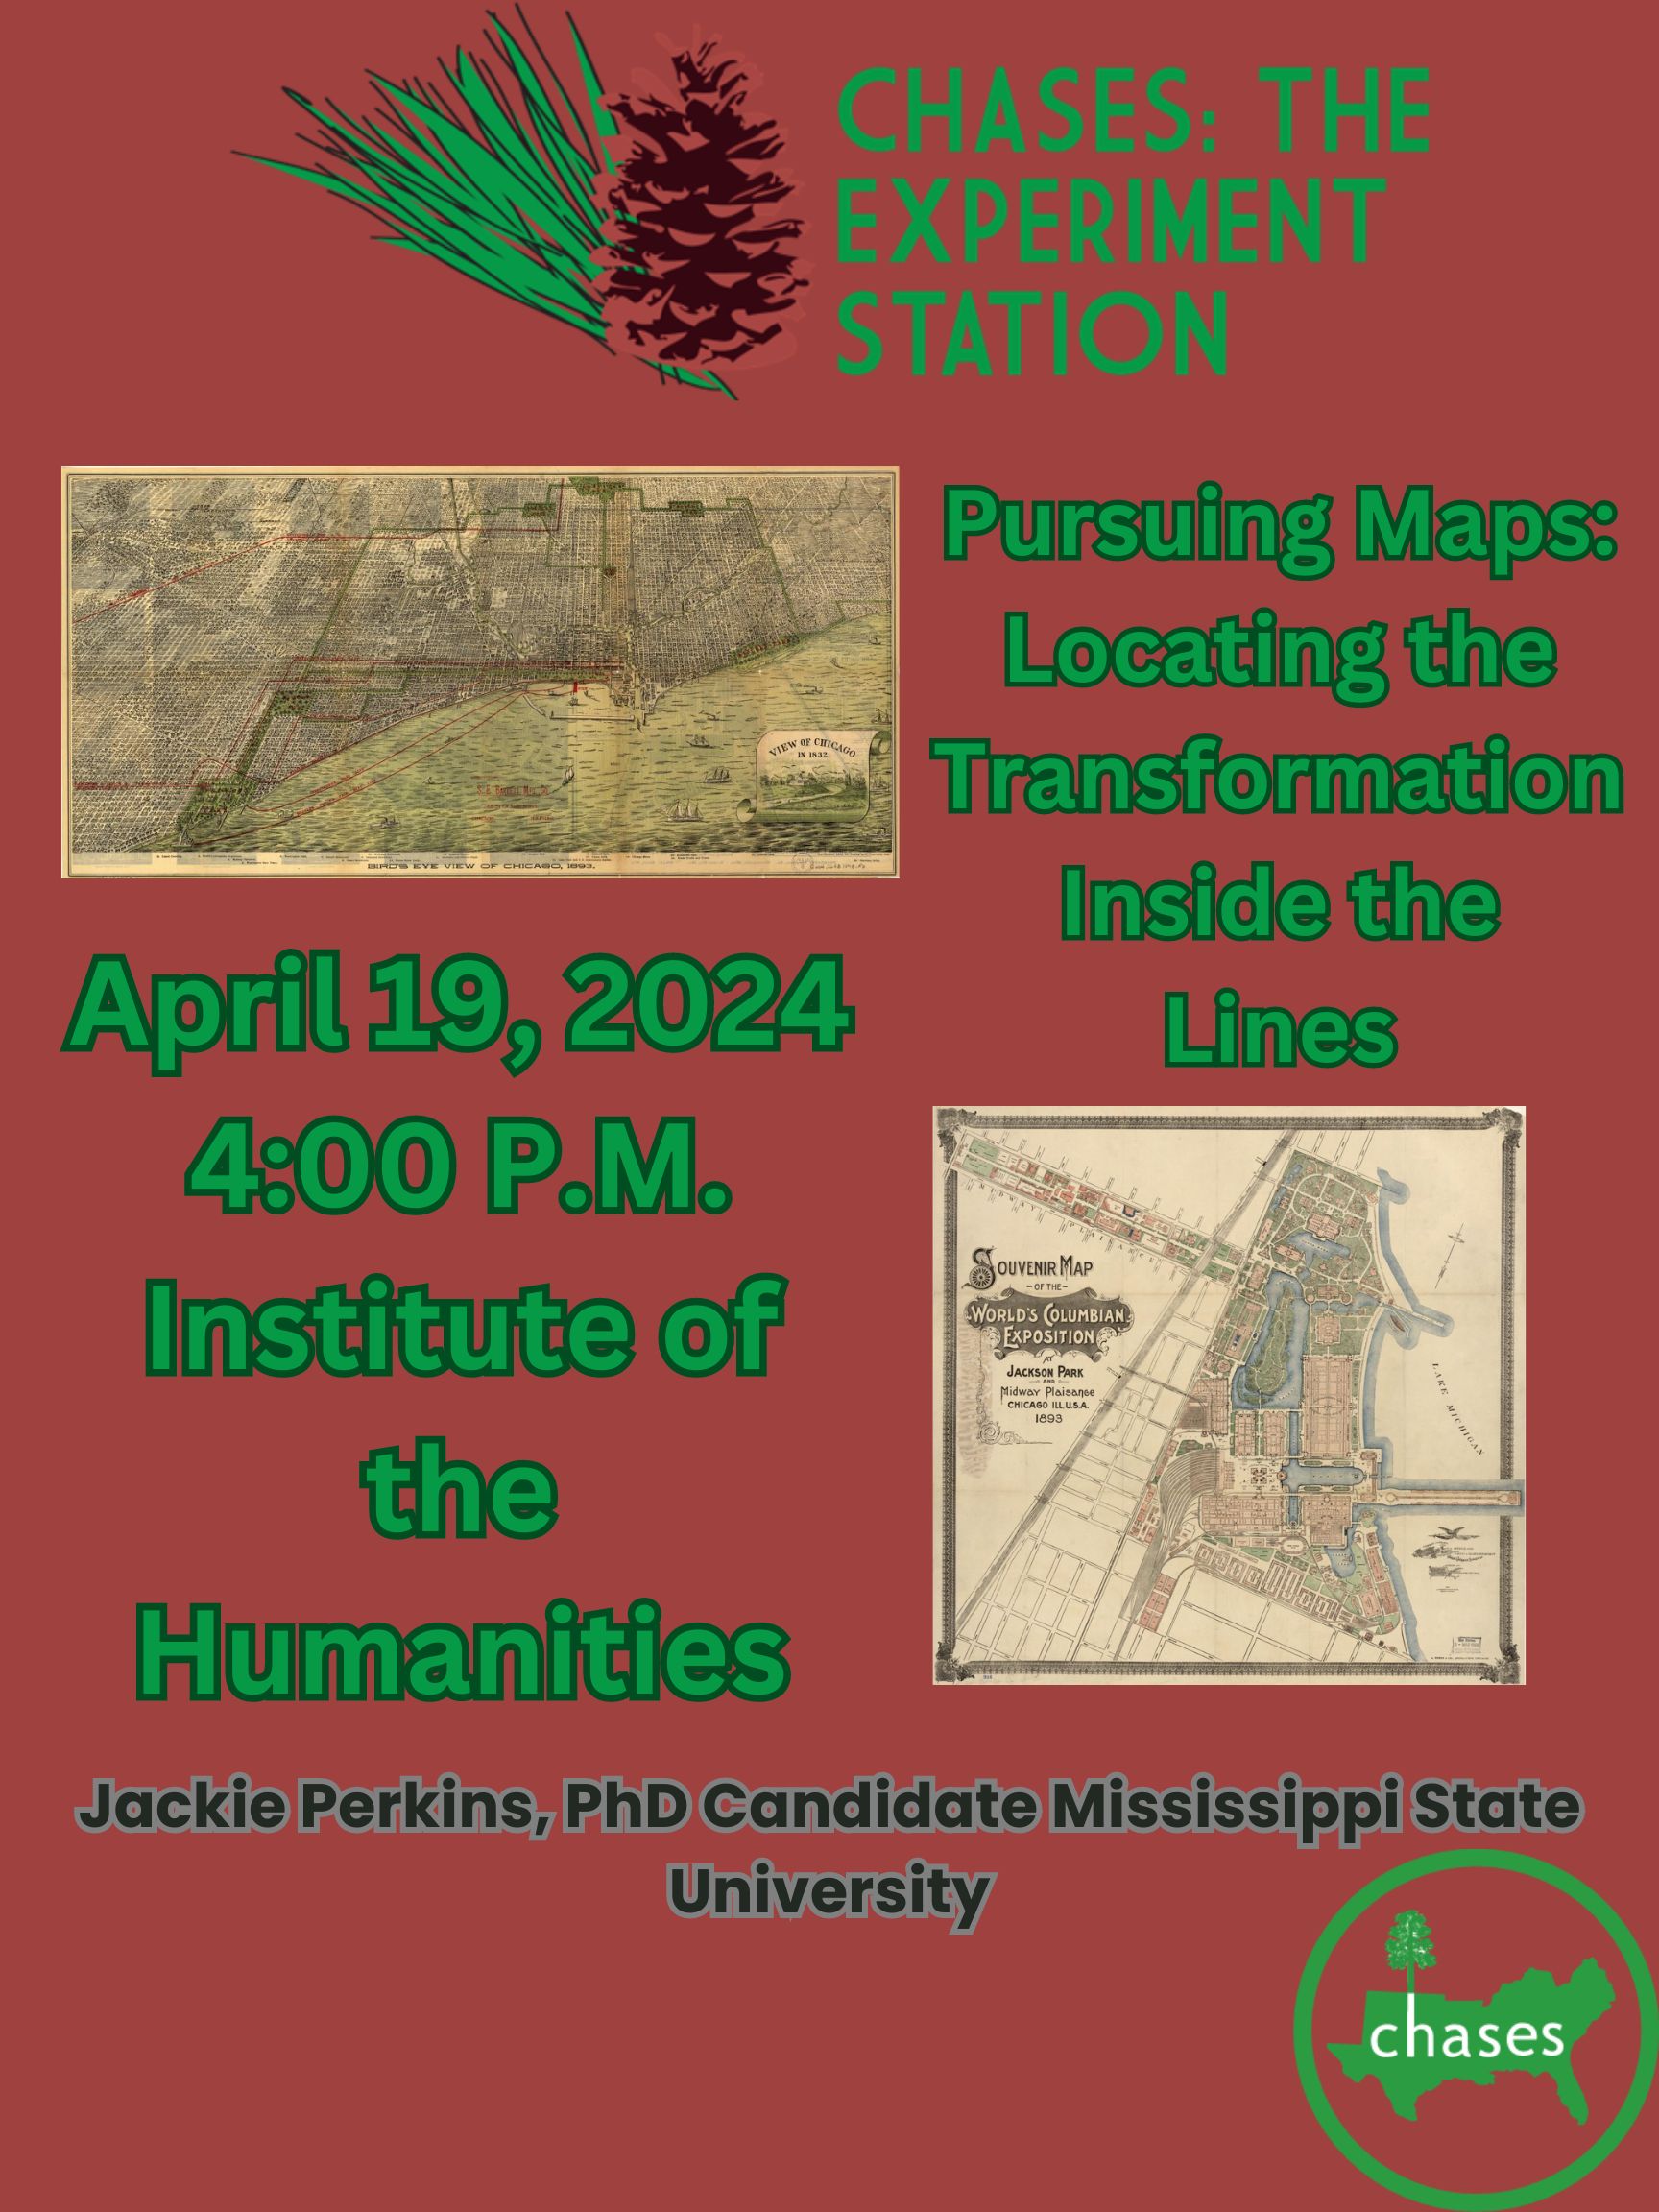 ﻿Jackie Perkins, Mississippi State University, April 19, 2024, 4pm at the Institute for the Humanities-"Pursuing Maps: Locating the Transformation Inside the Lines."  